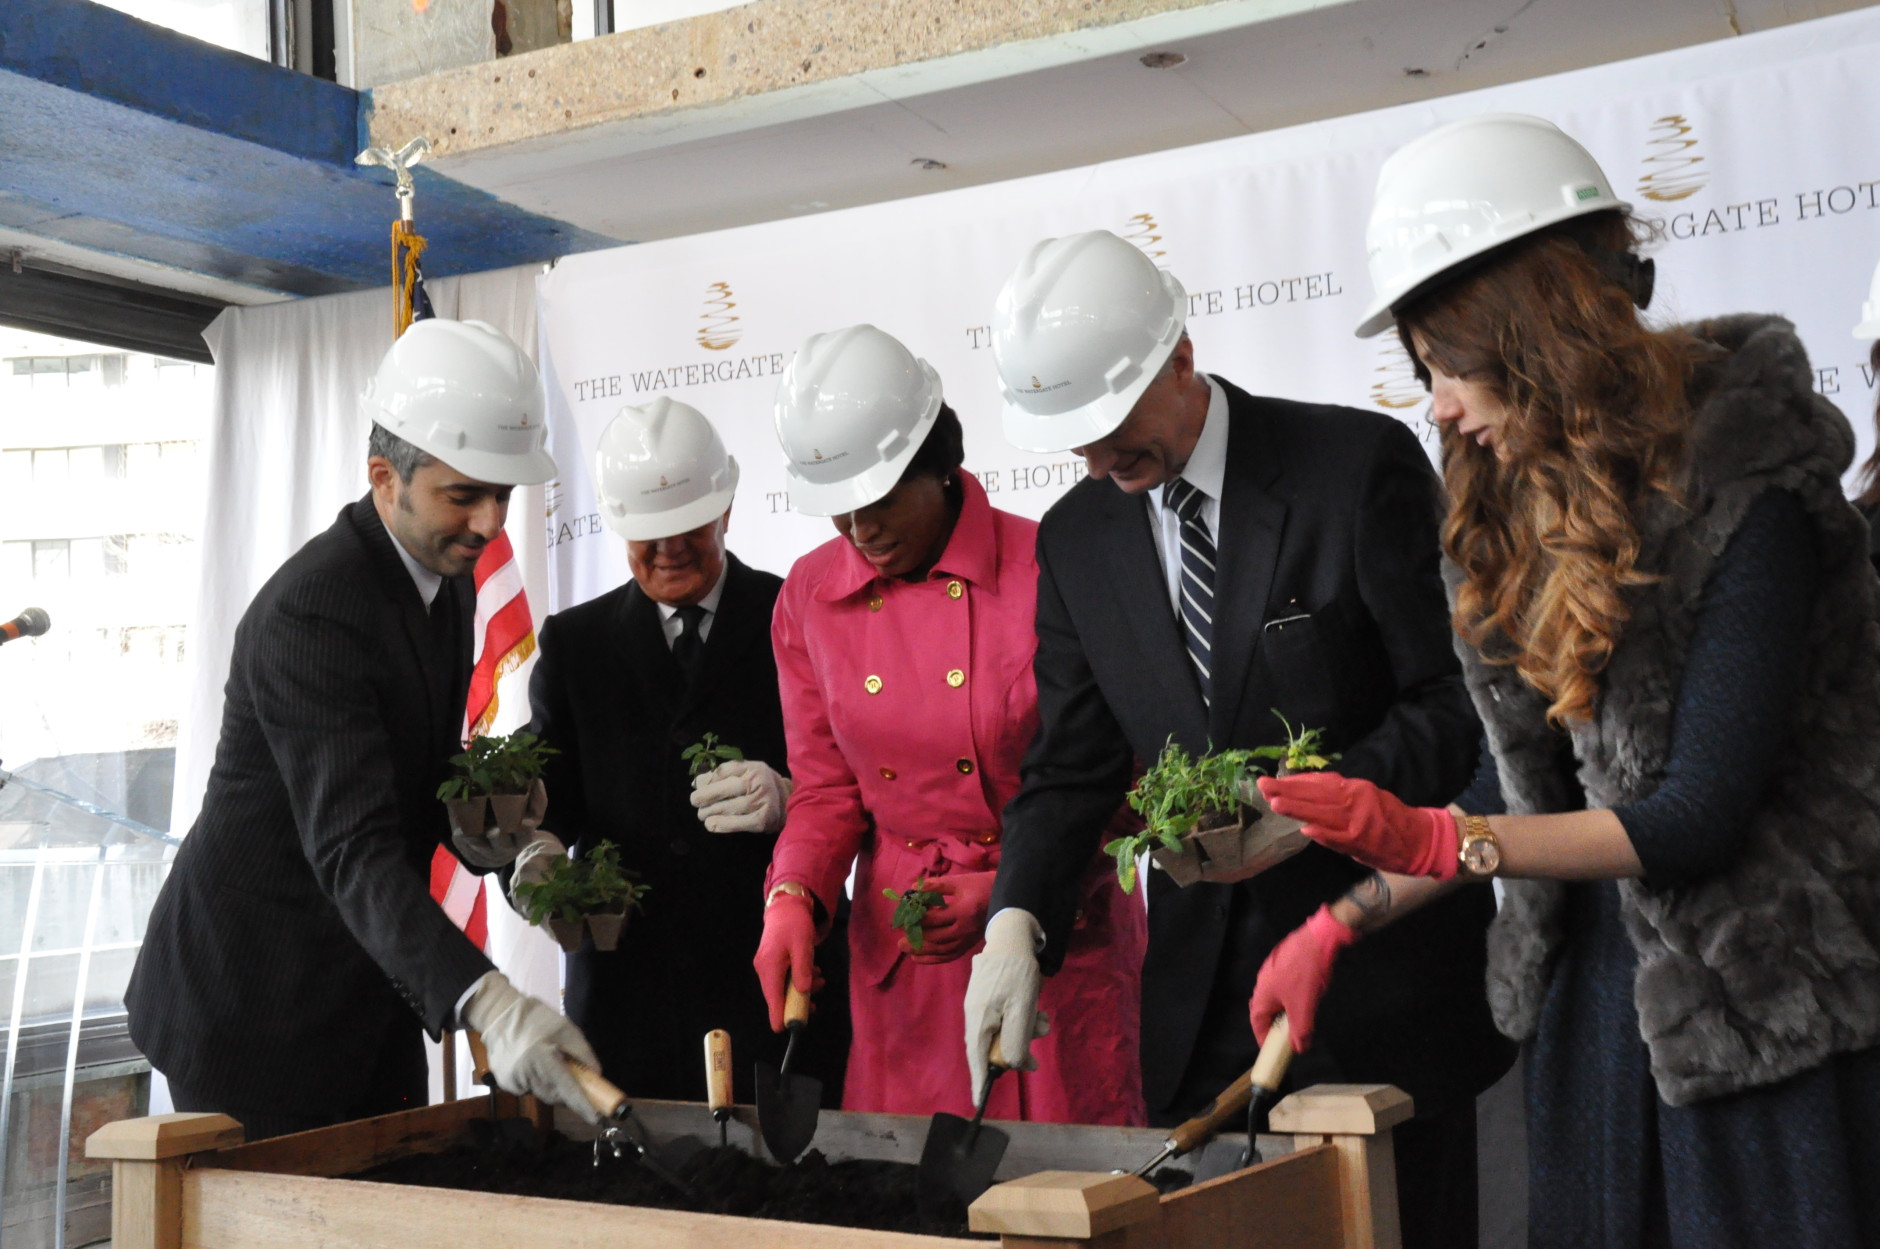 At the hotel's topping off event on Thursday, owner/developer Jacques Cohen, Managing Director Johnny So, D.C. Mayor Muriel Bowser, D.C. Councilmember Jack Evans and owner/developer Rakel Cohen plant seeds that will be used for the hotel's landscaping. (WTOP/Rachel Nania) 